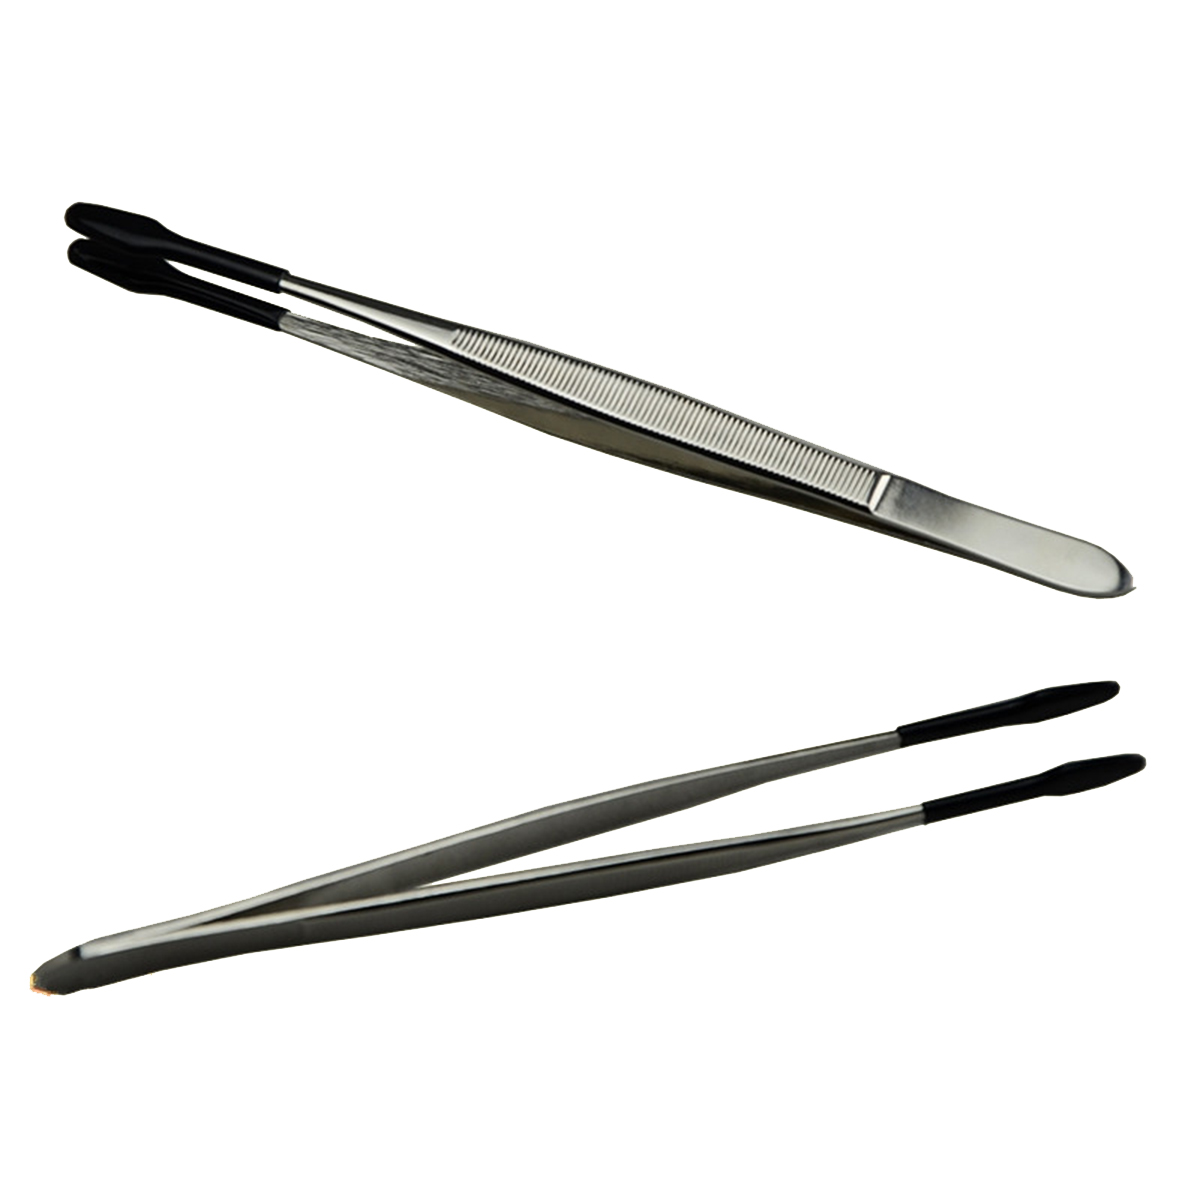 15cm-Stainless-Steel-Tweezer-for-JewelryCoinStamp-Collection-Handling-Tool-1353175